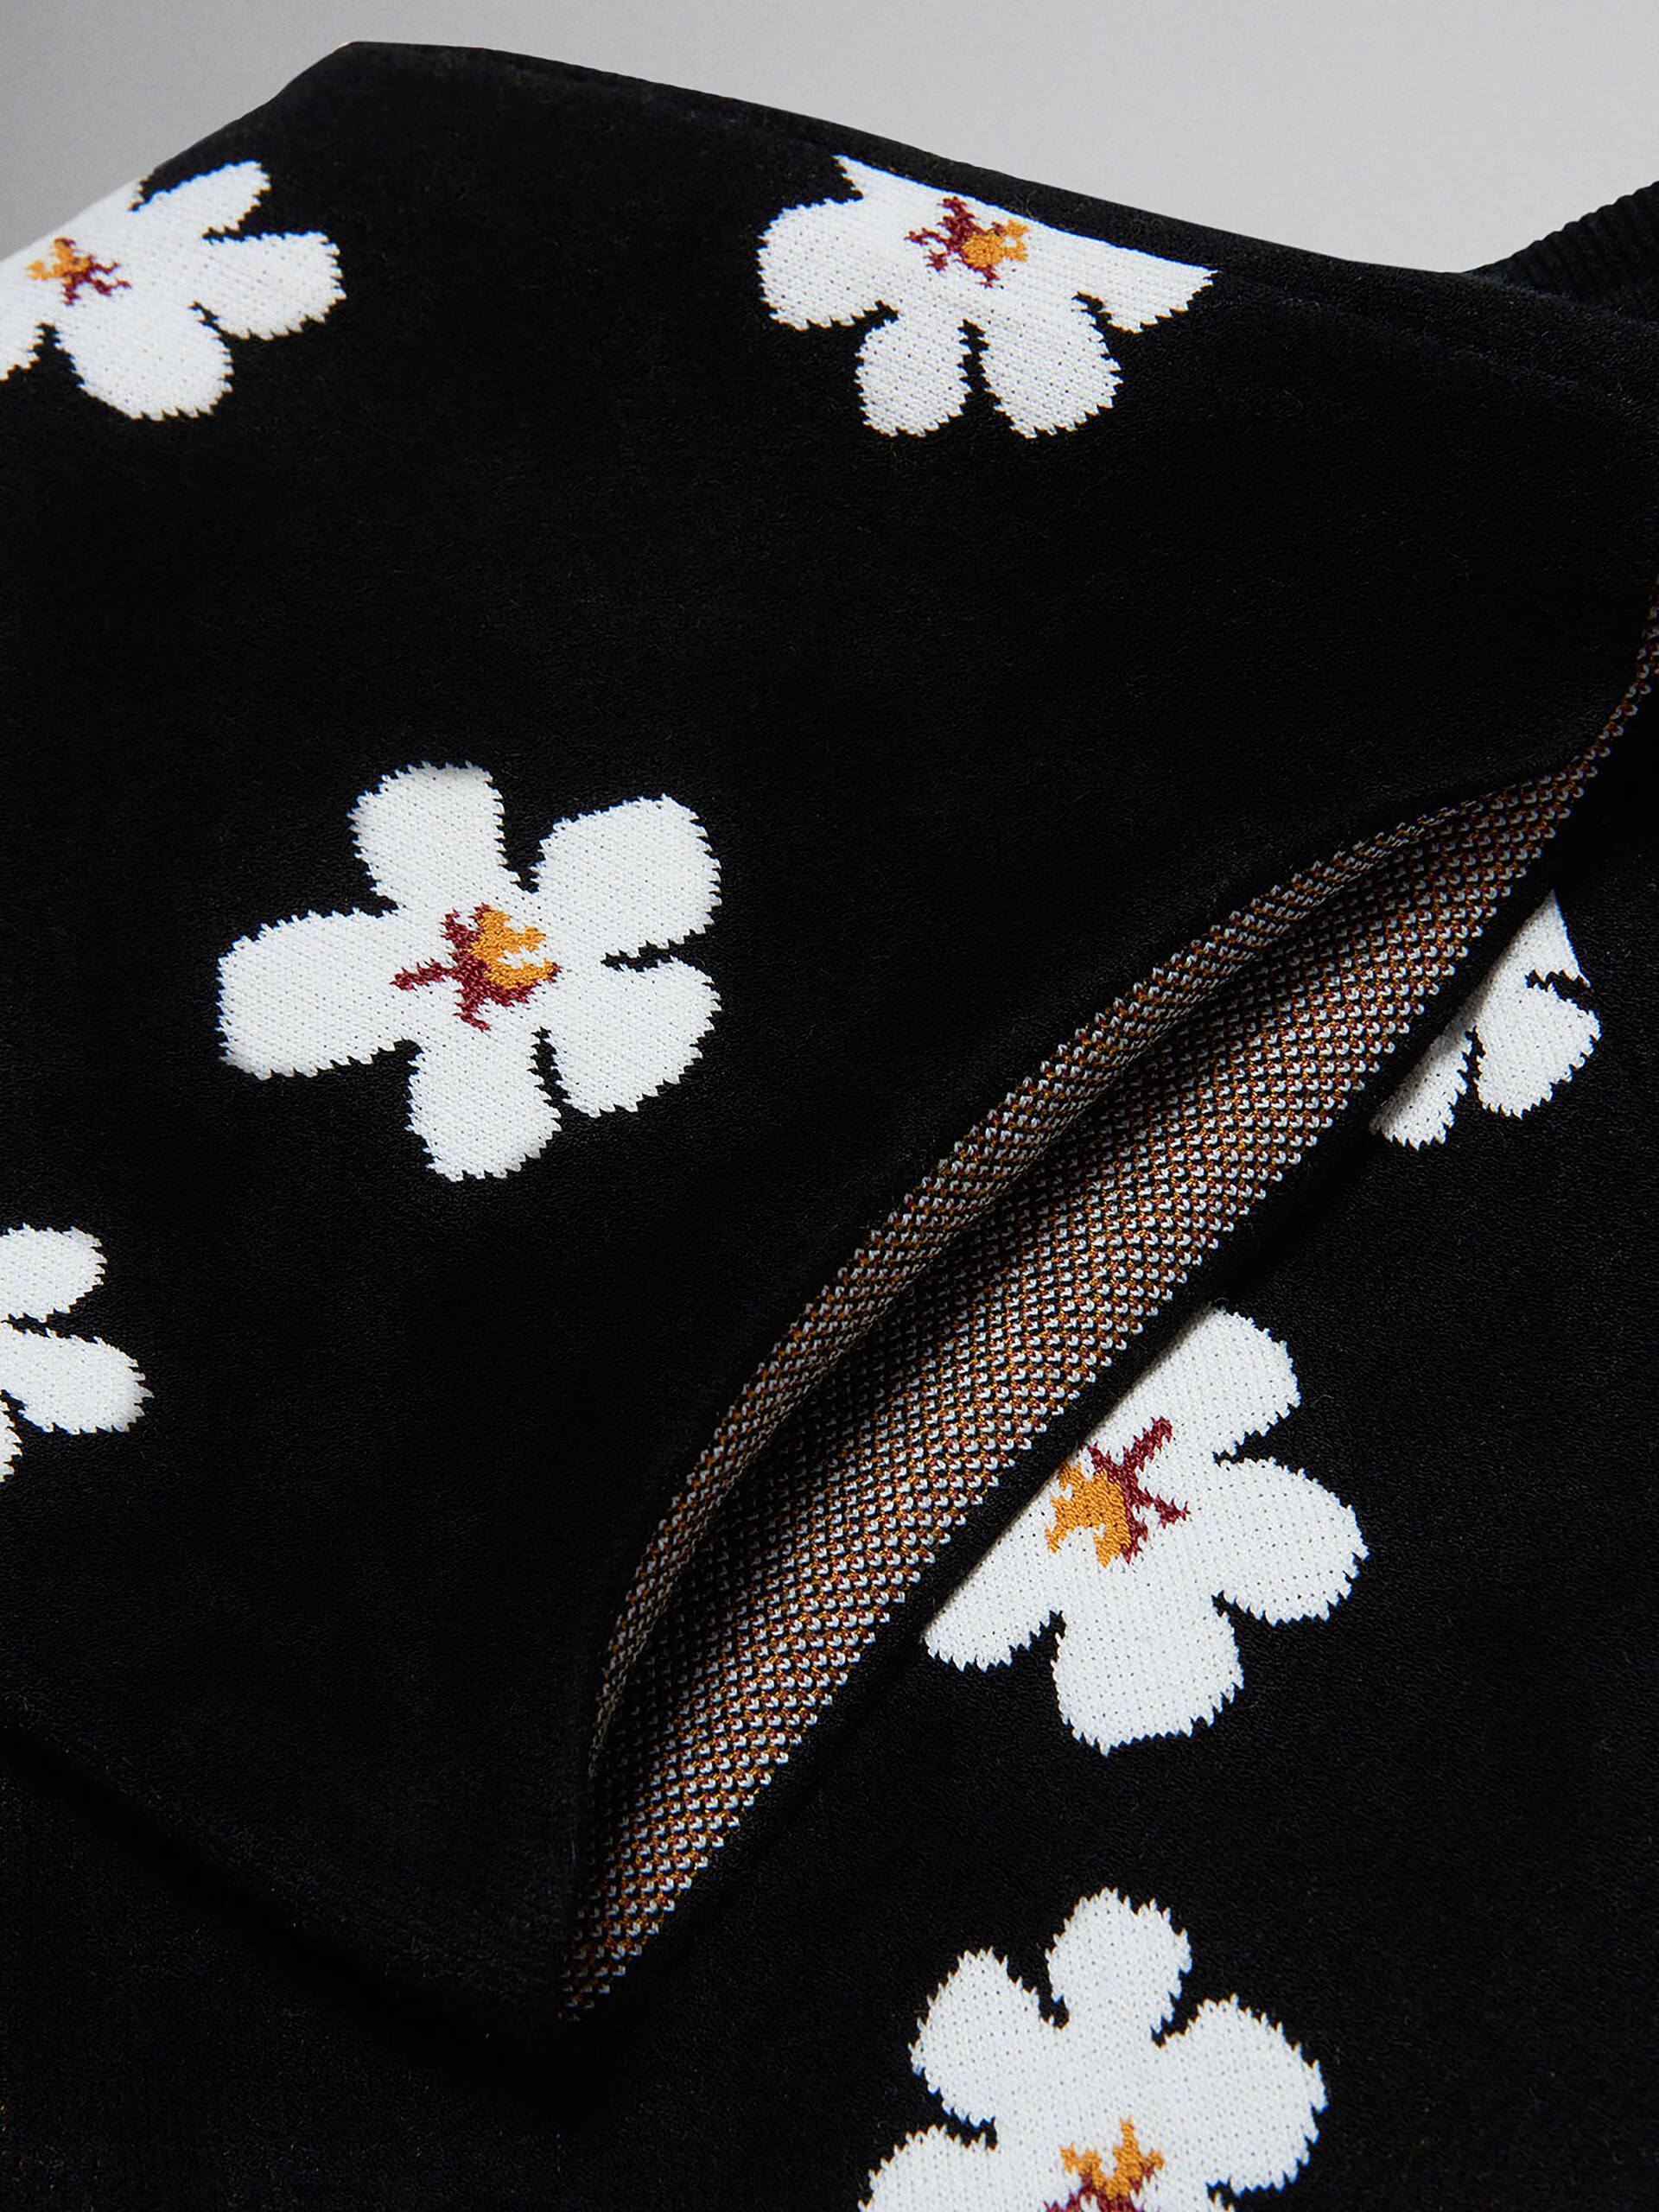 Black trousers with jacquard Daisy motif - Pants - Image 4